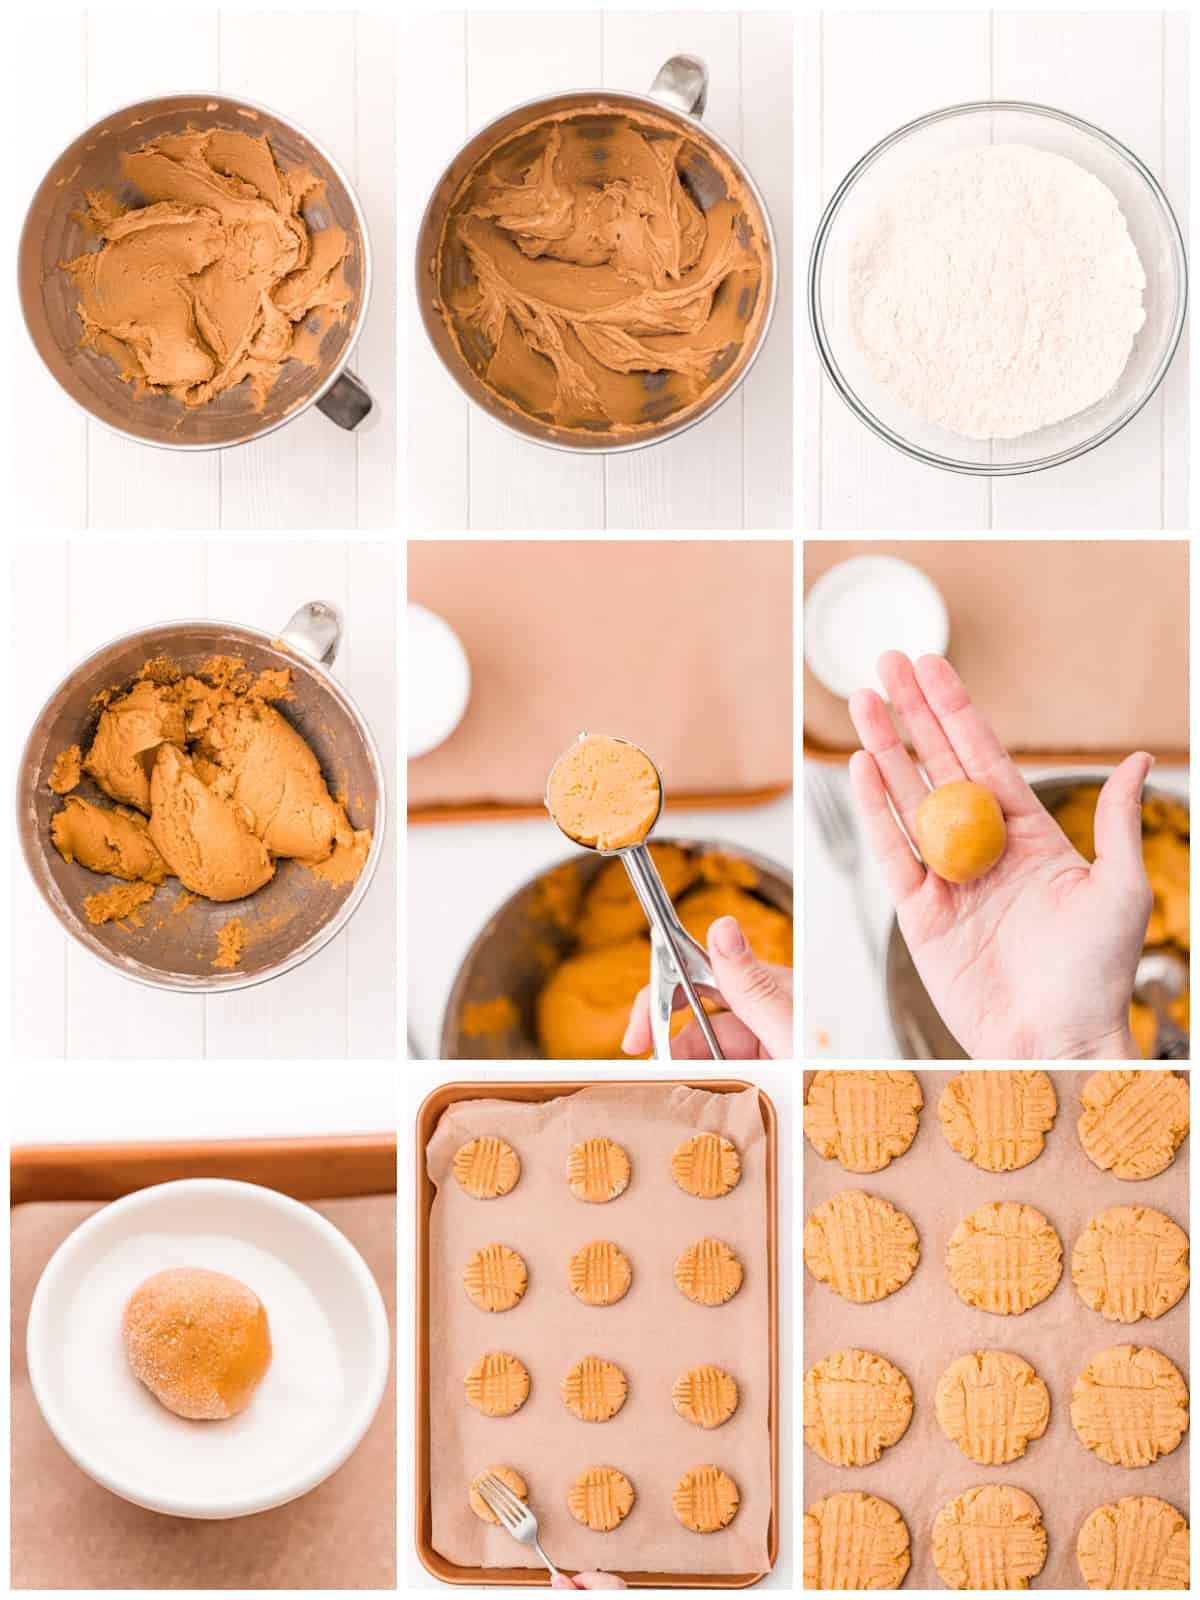 Step by step photos on how to make Easy Peanut Butter Cookies.